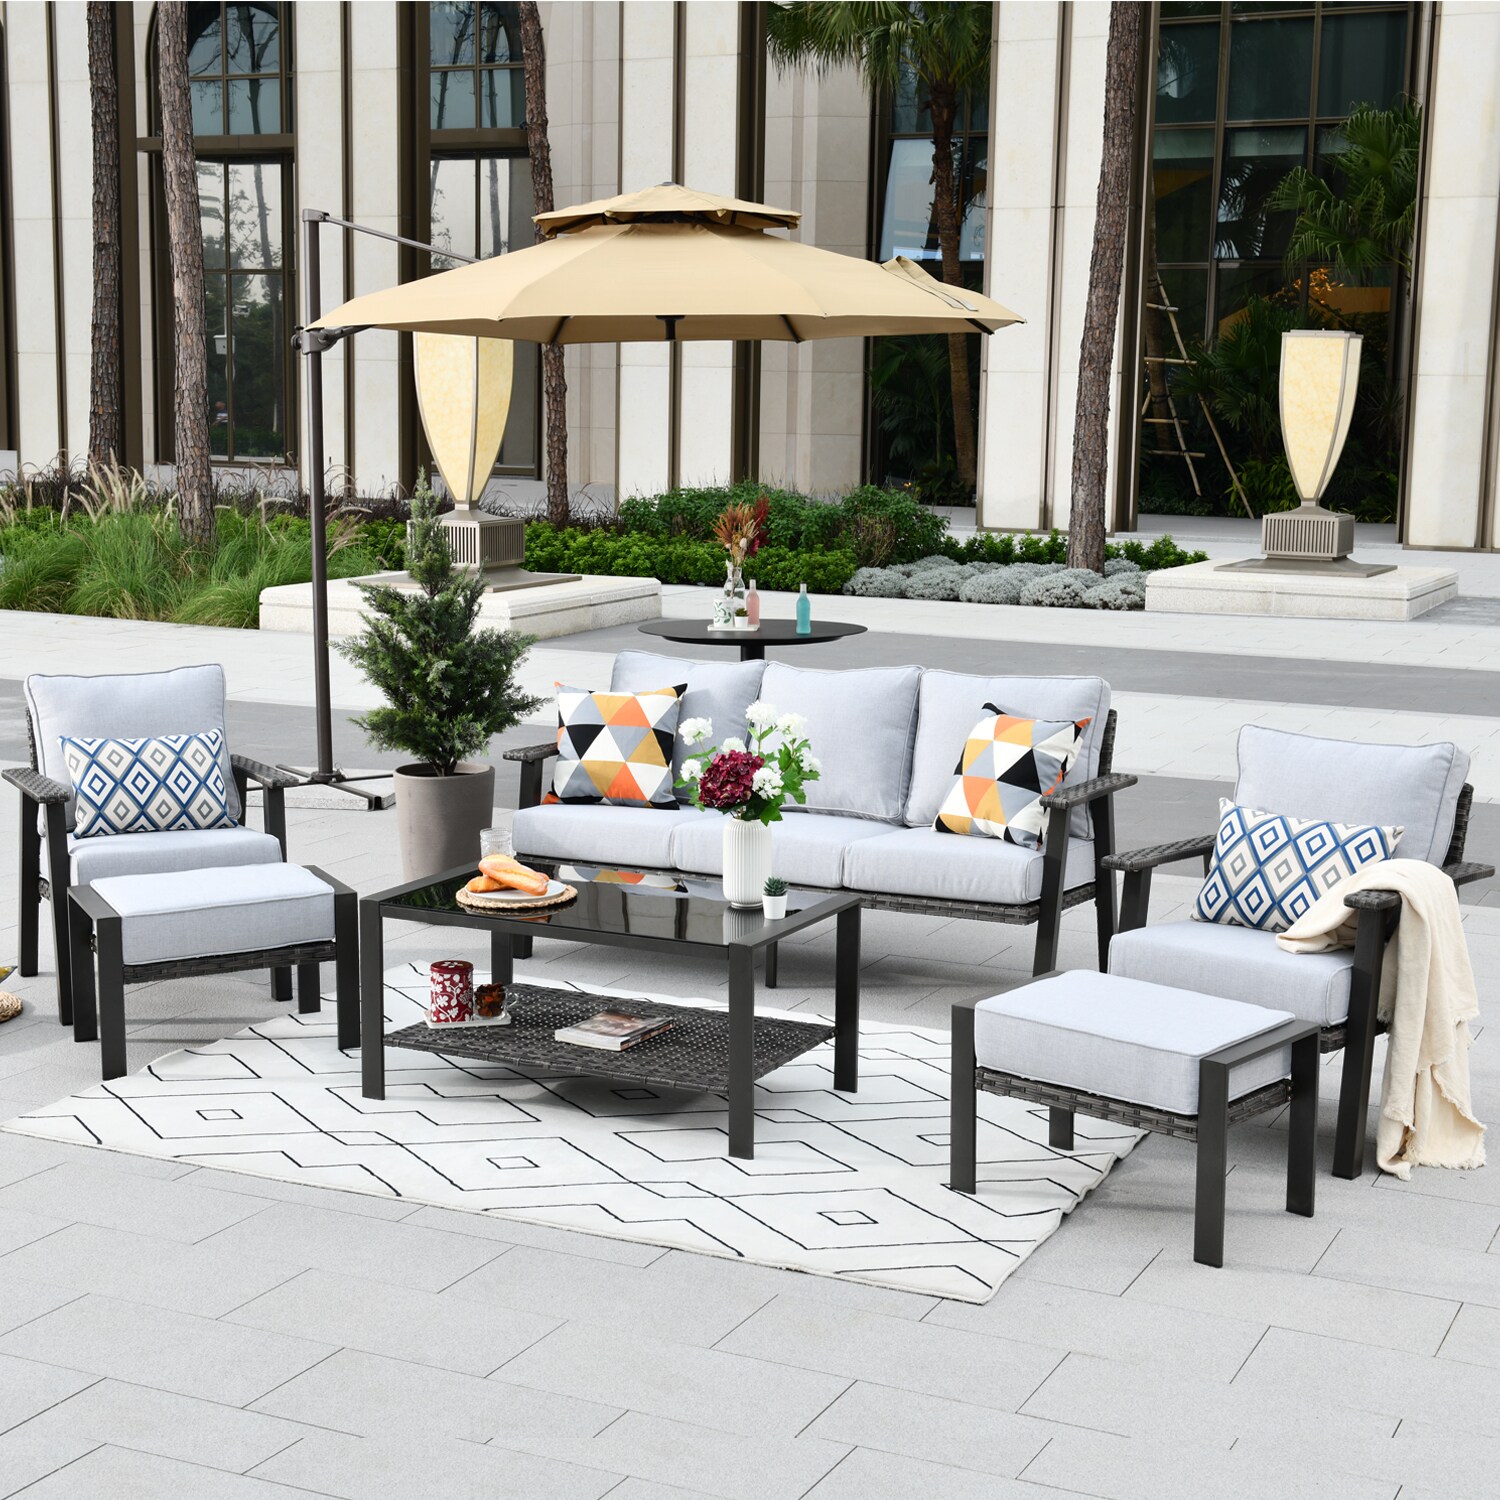 Patiomore 5-Piece Outdoor Patio Sectional Sofa Sets,All Weather Black Brown Wicker Furniture Set with Glass Coffee Table Grey Cushion